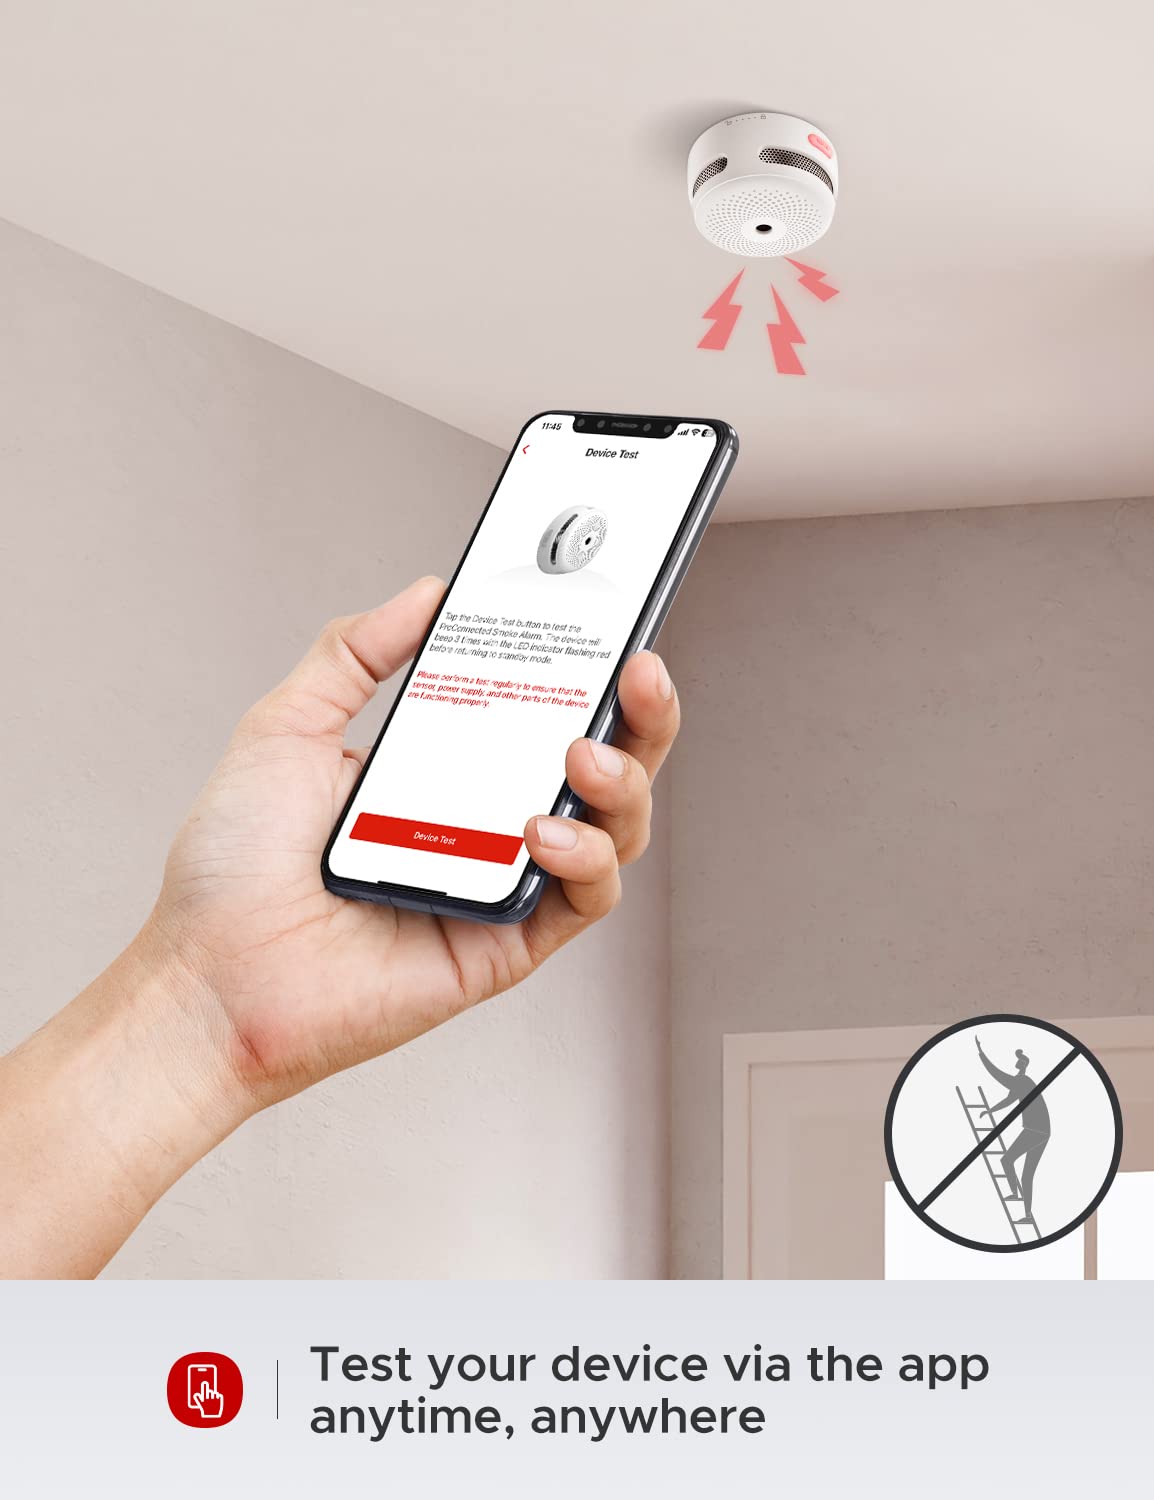 X-Sense Smart Smoke Detectors with SBS50 Base Station, Wi-Fi Smoke Alarm Compatible with X-Sense Home Security App, Wireless Interconnected Mini Fire Alarm, Model FS51